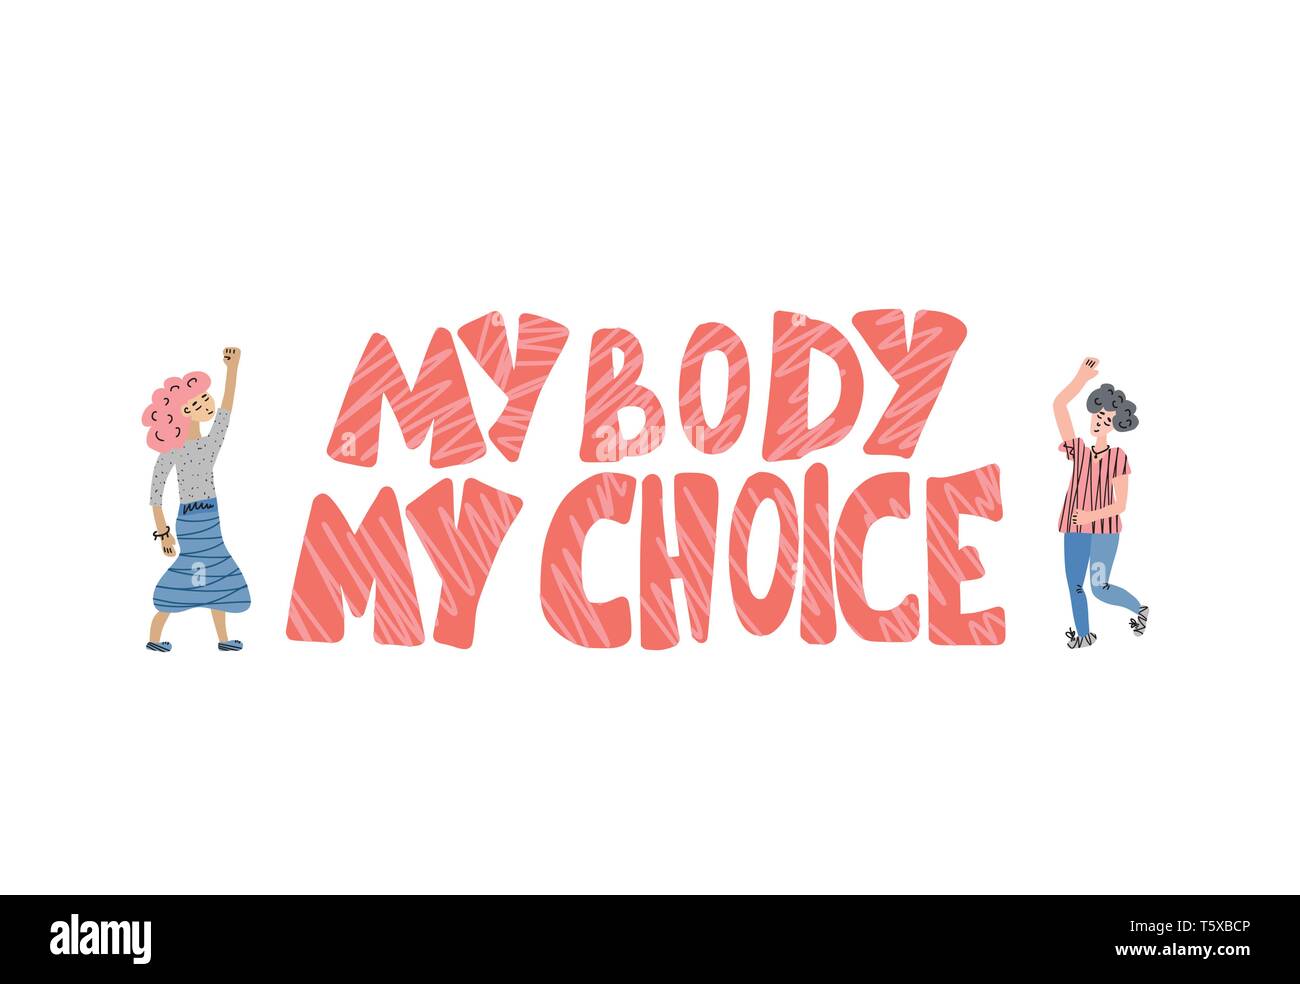 My body my choice Illustrations and Stock Art 335 My body my choice  illustration graphics and vector EPS clip art available to search from  thousands of royalty free clipart providers